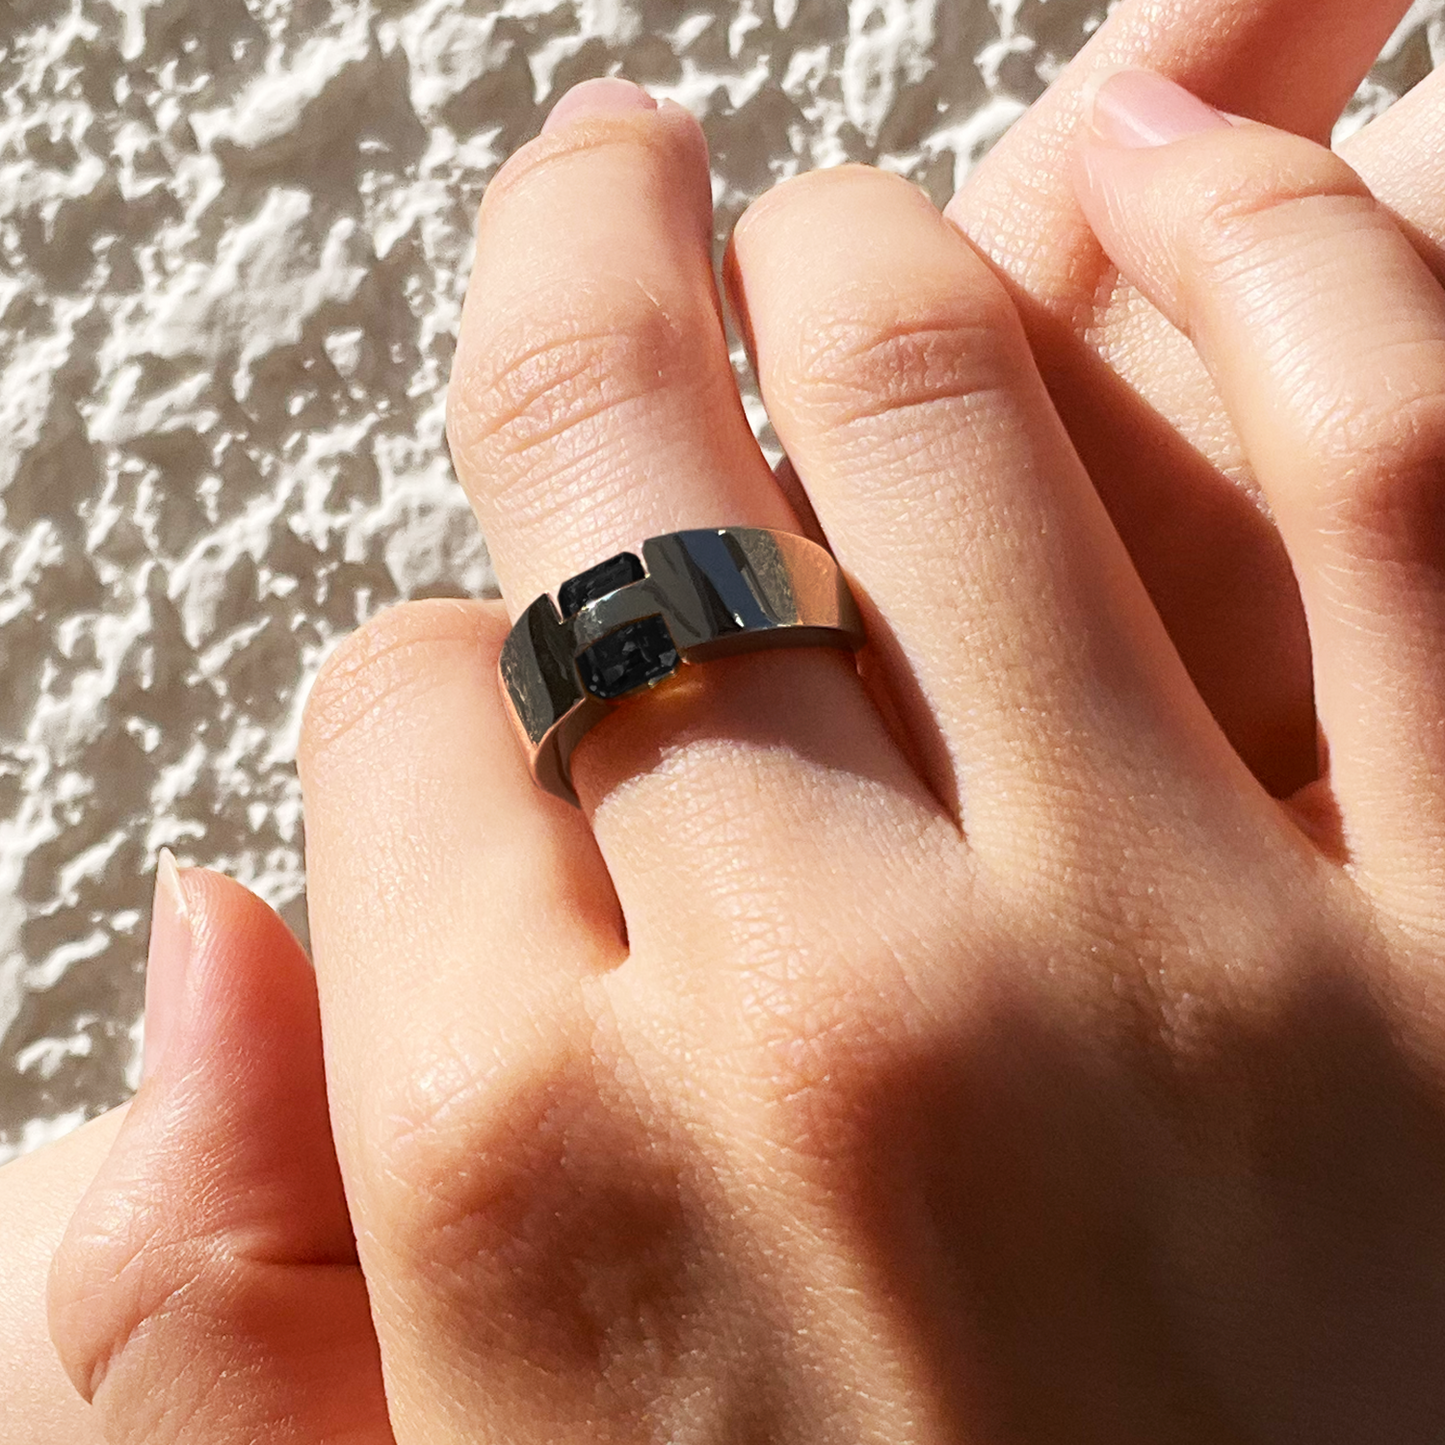 [Black onyx] hide and sparkle silver #exploring